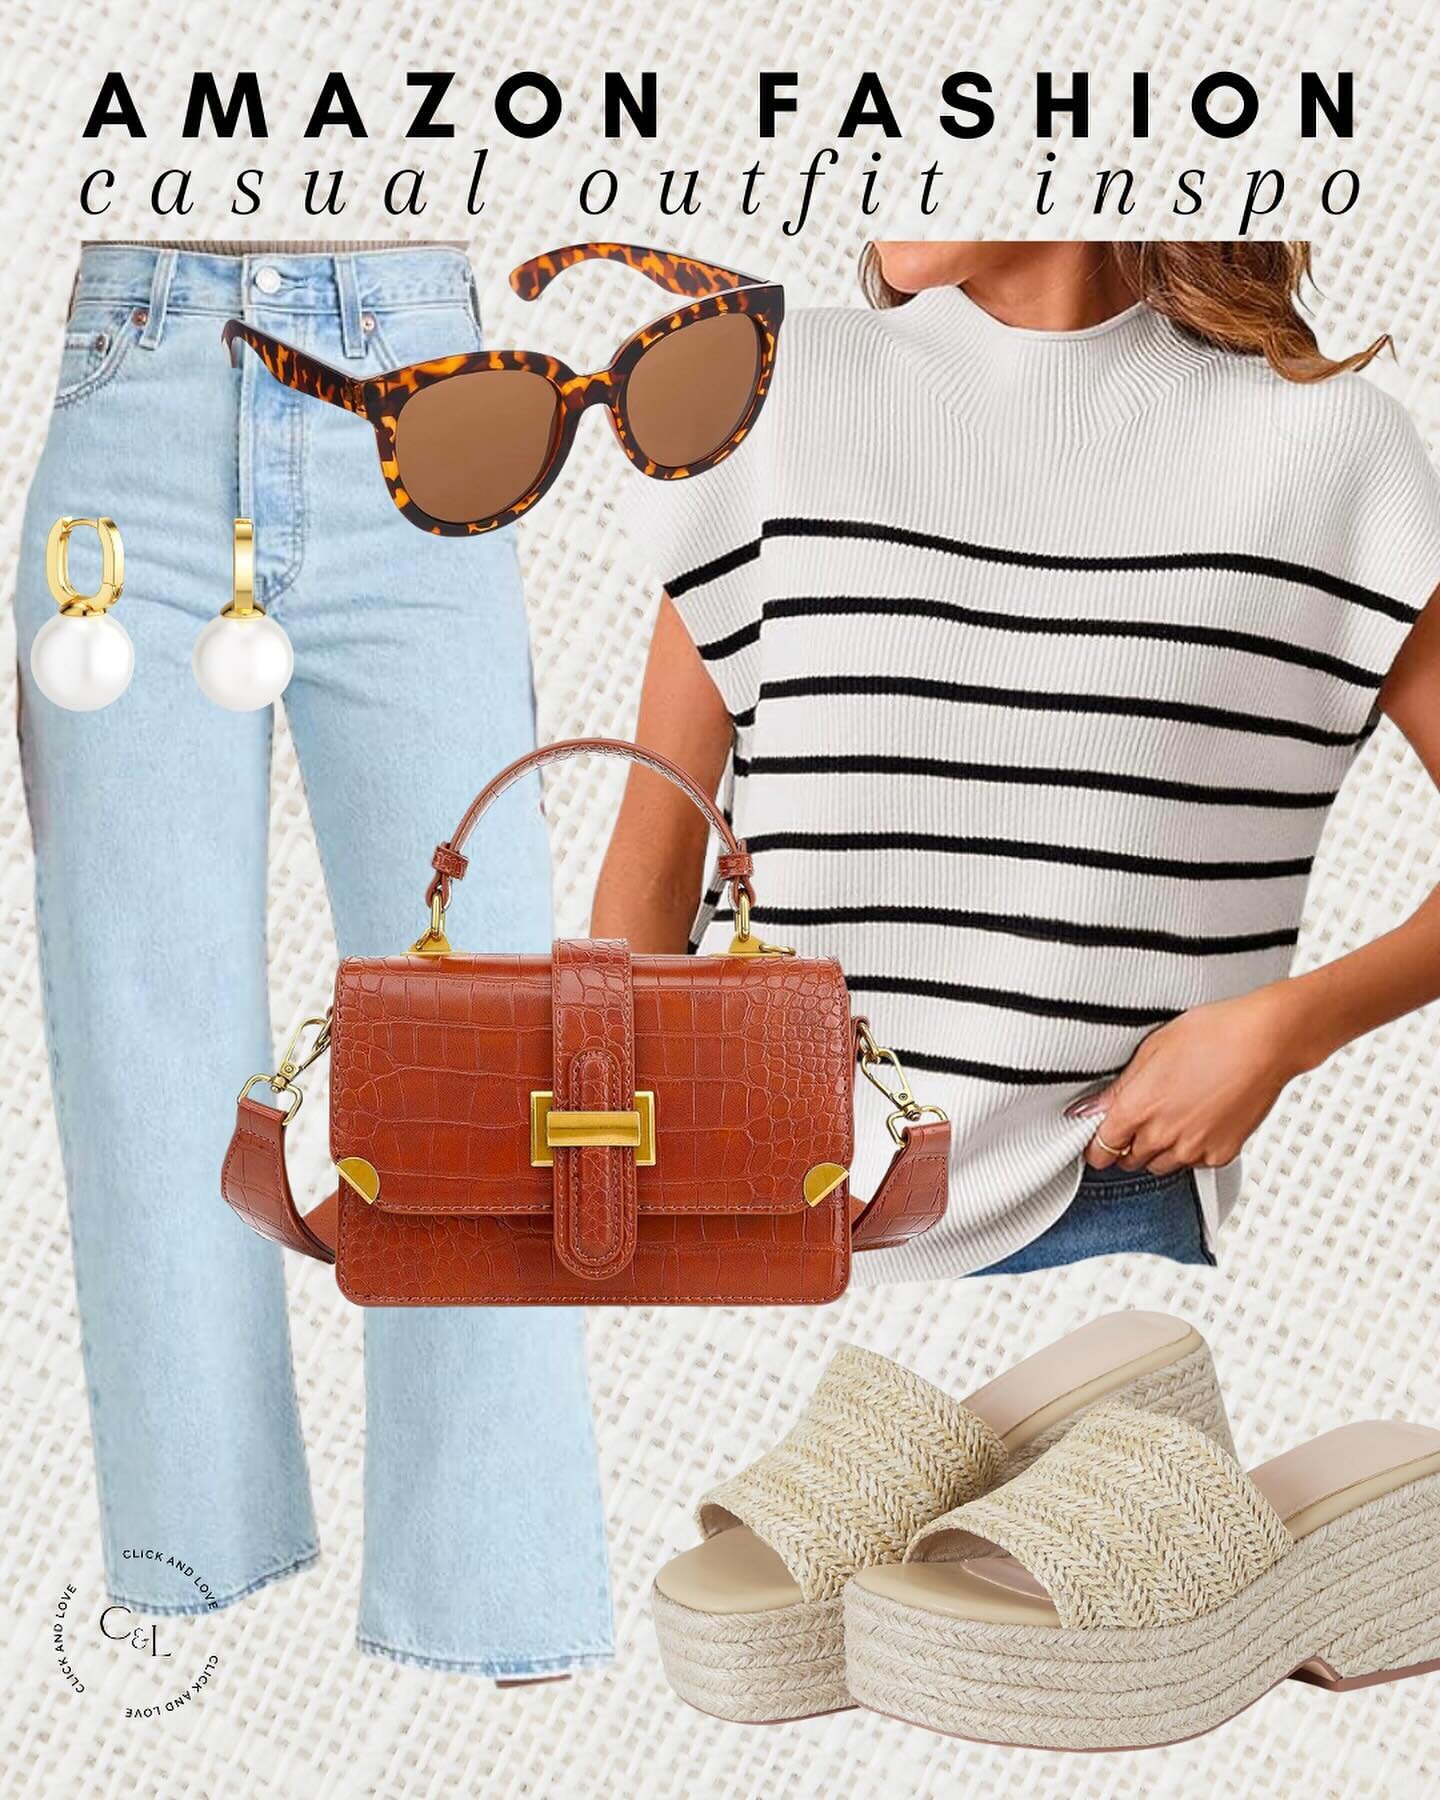 Amazon Fashion finds! Comment &ldquo;SHOP&rdquo; and I will DM you a link to shop these fashion mood boards! There are lots of affordable items in the mix. I am looking forward to spring with these outfits! You can comment to shop, or head to the lin